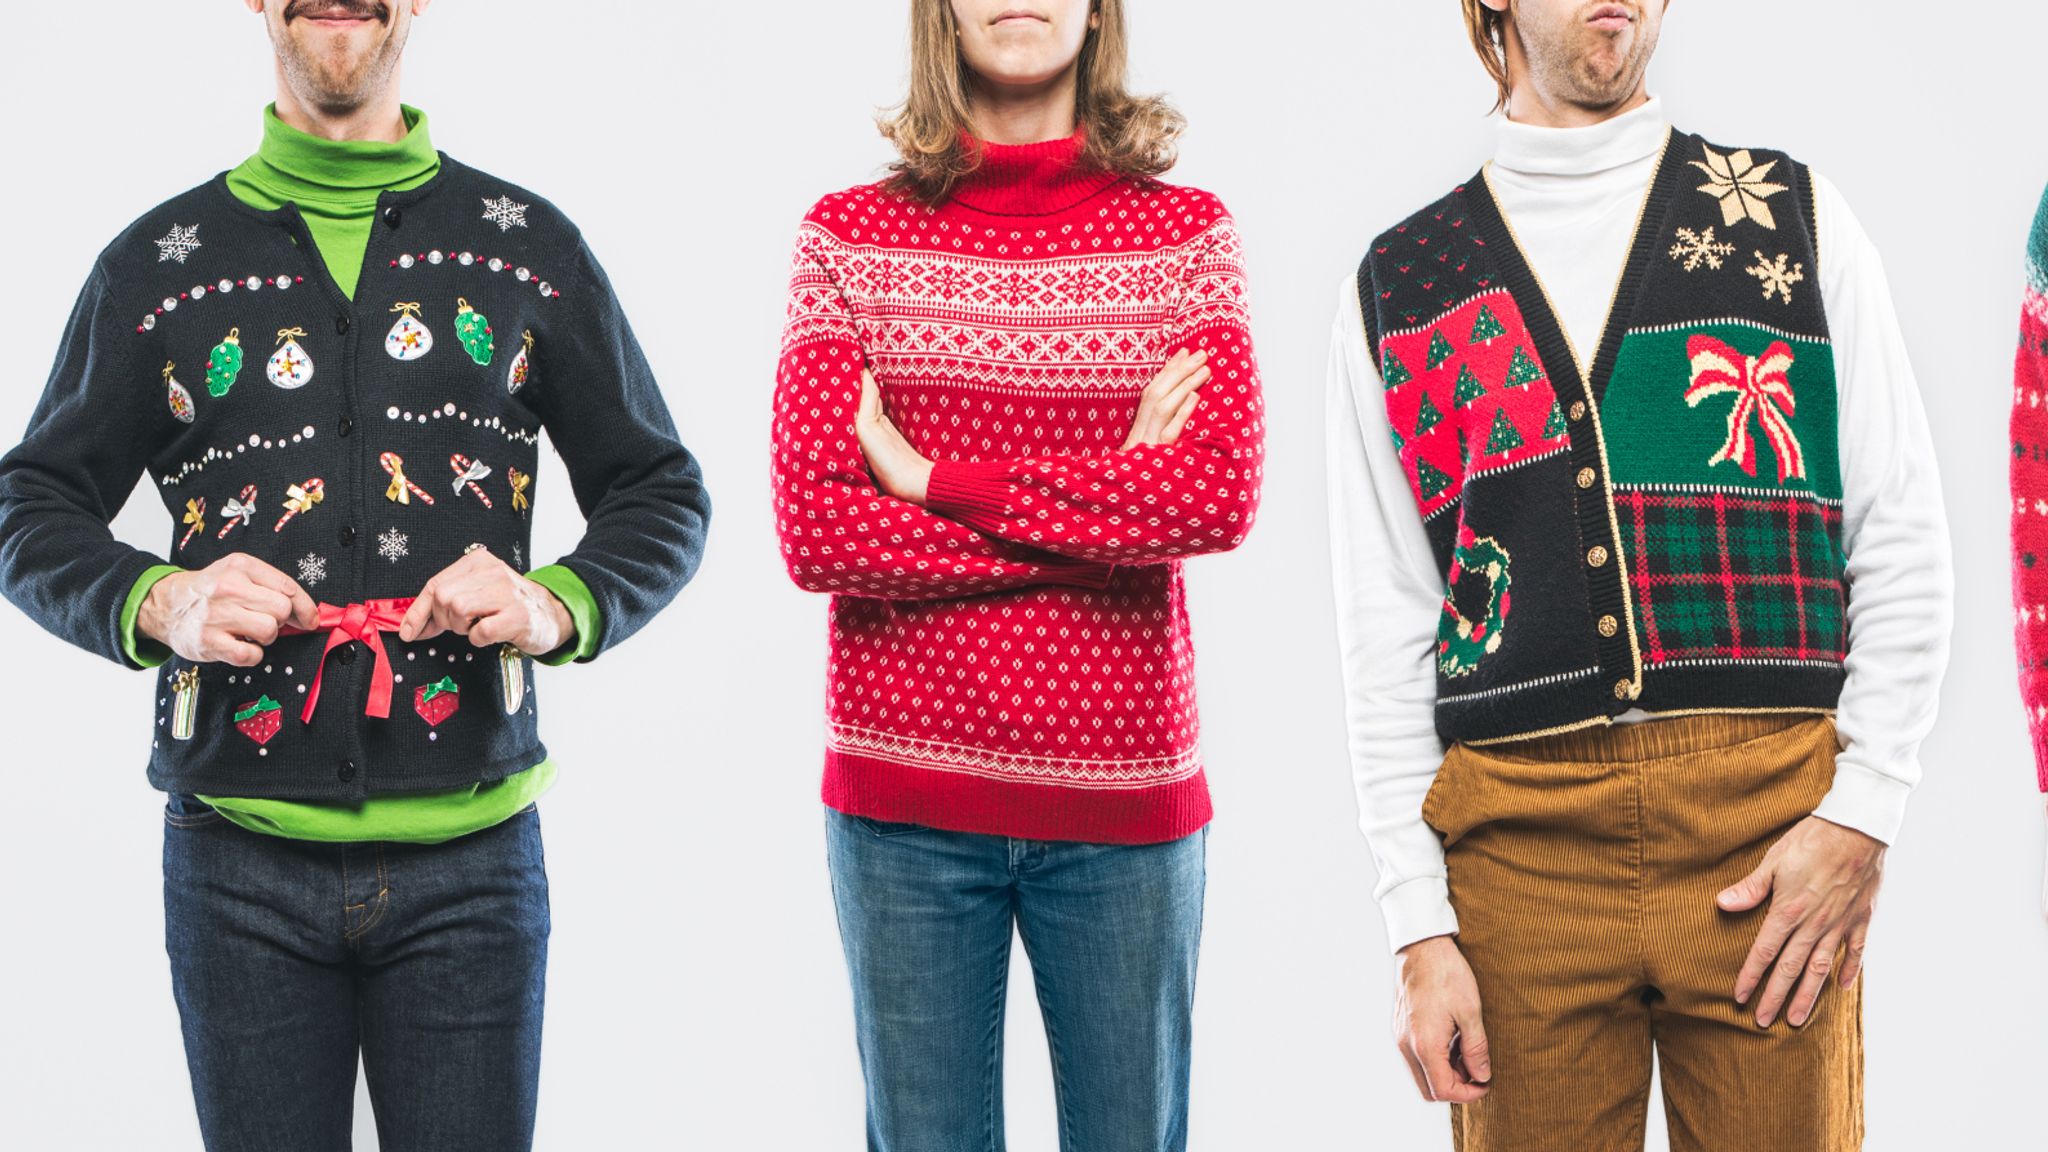 Wool-based Christmas jumpers that are made inside the EU could cost more un...